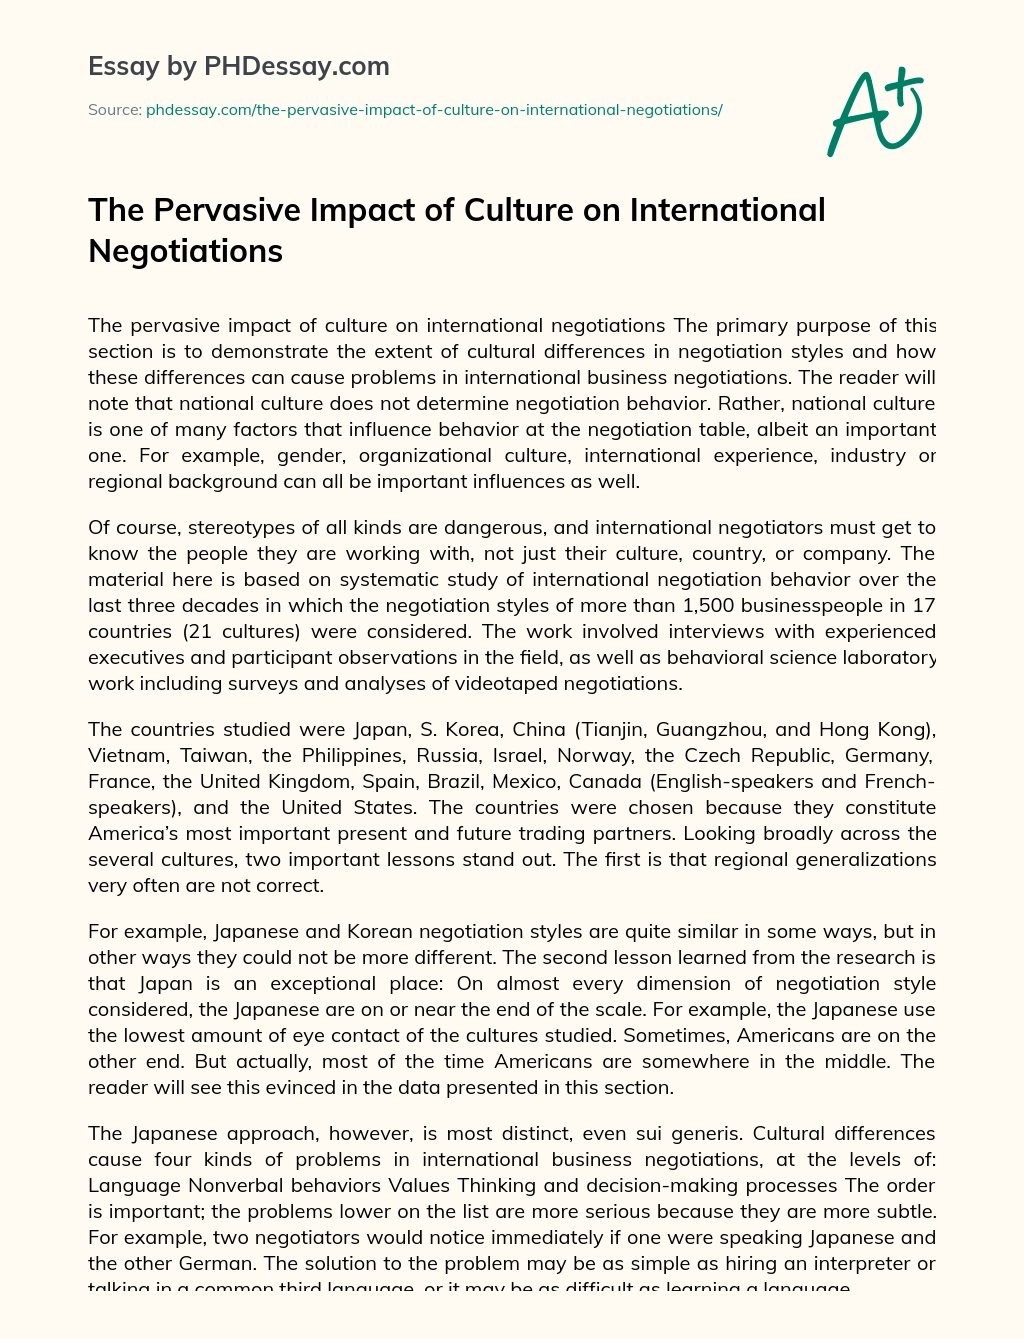 The Pervasive Impact of Culture on International Negotiations essay